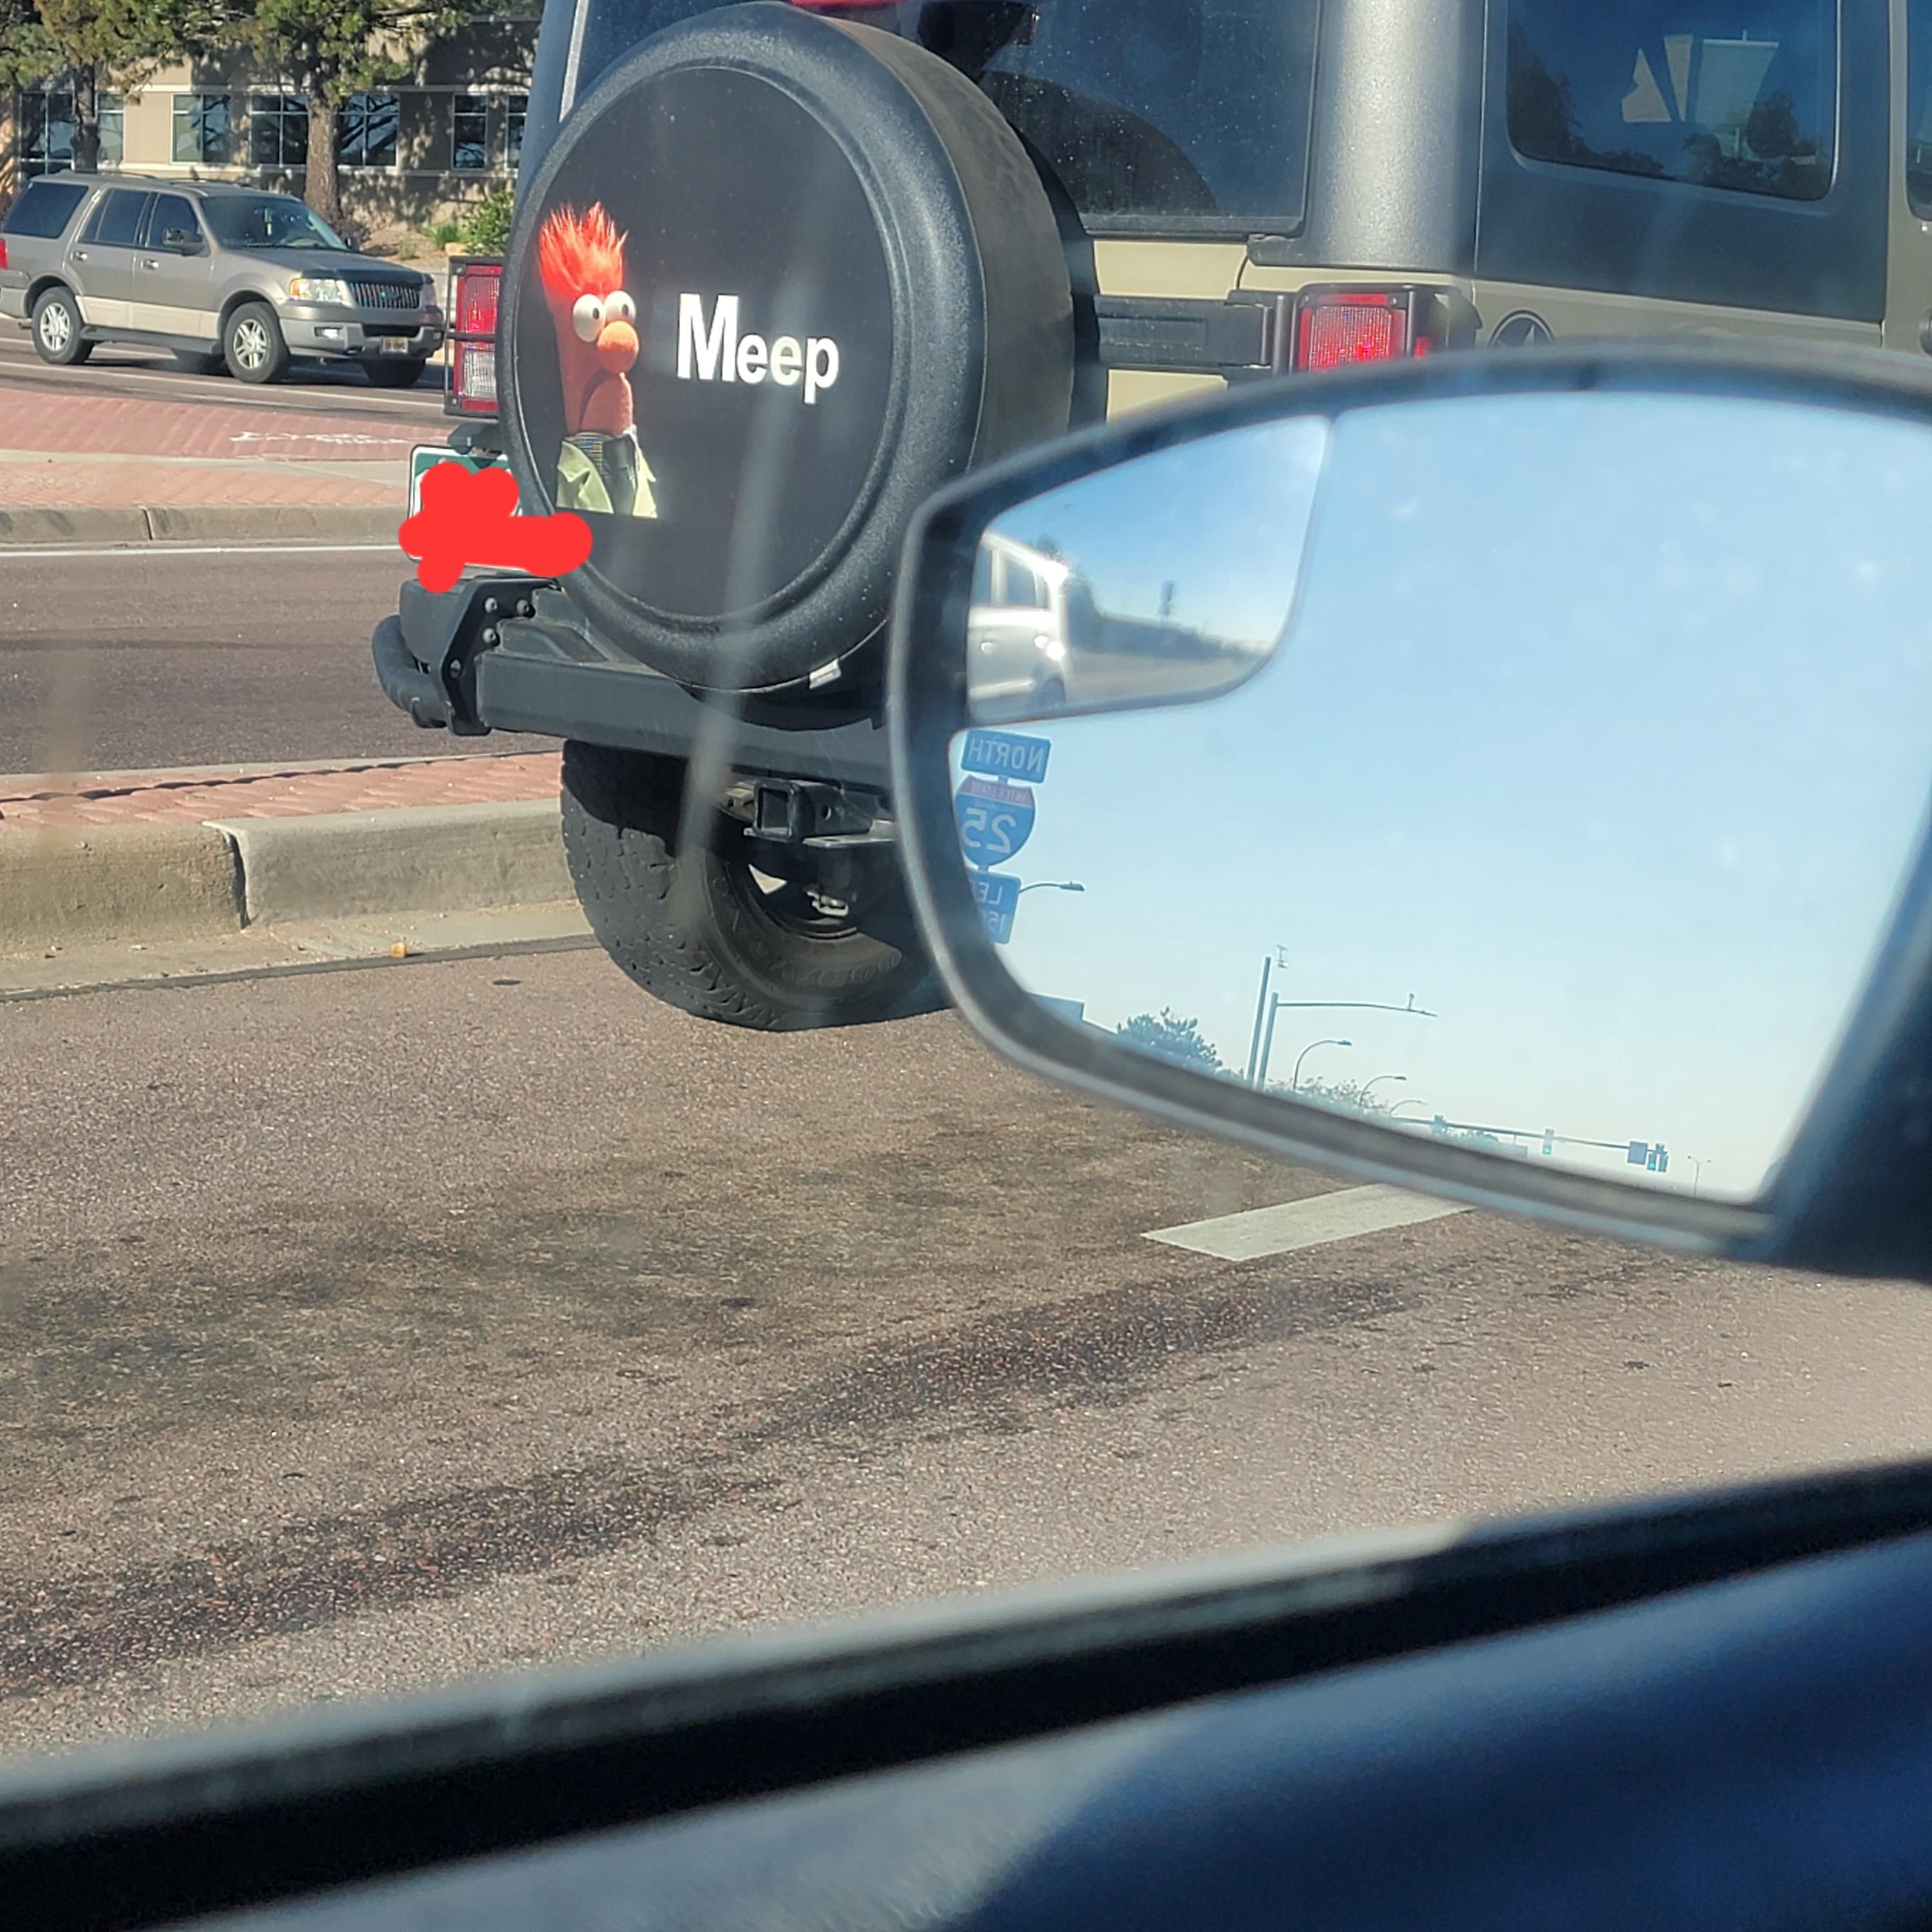 Saw this tire cover for a Jeep today.